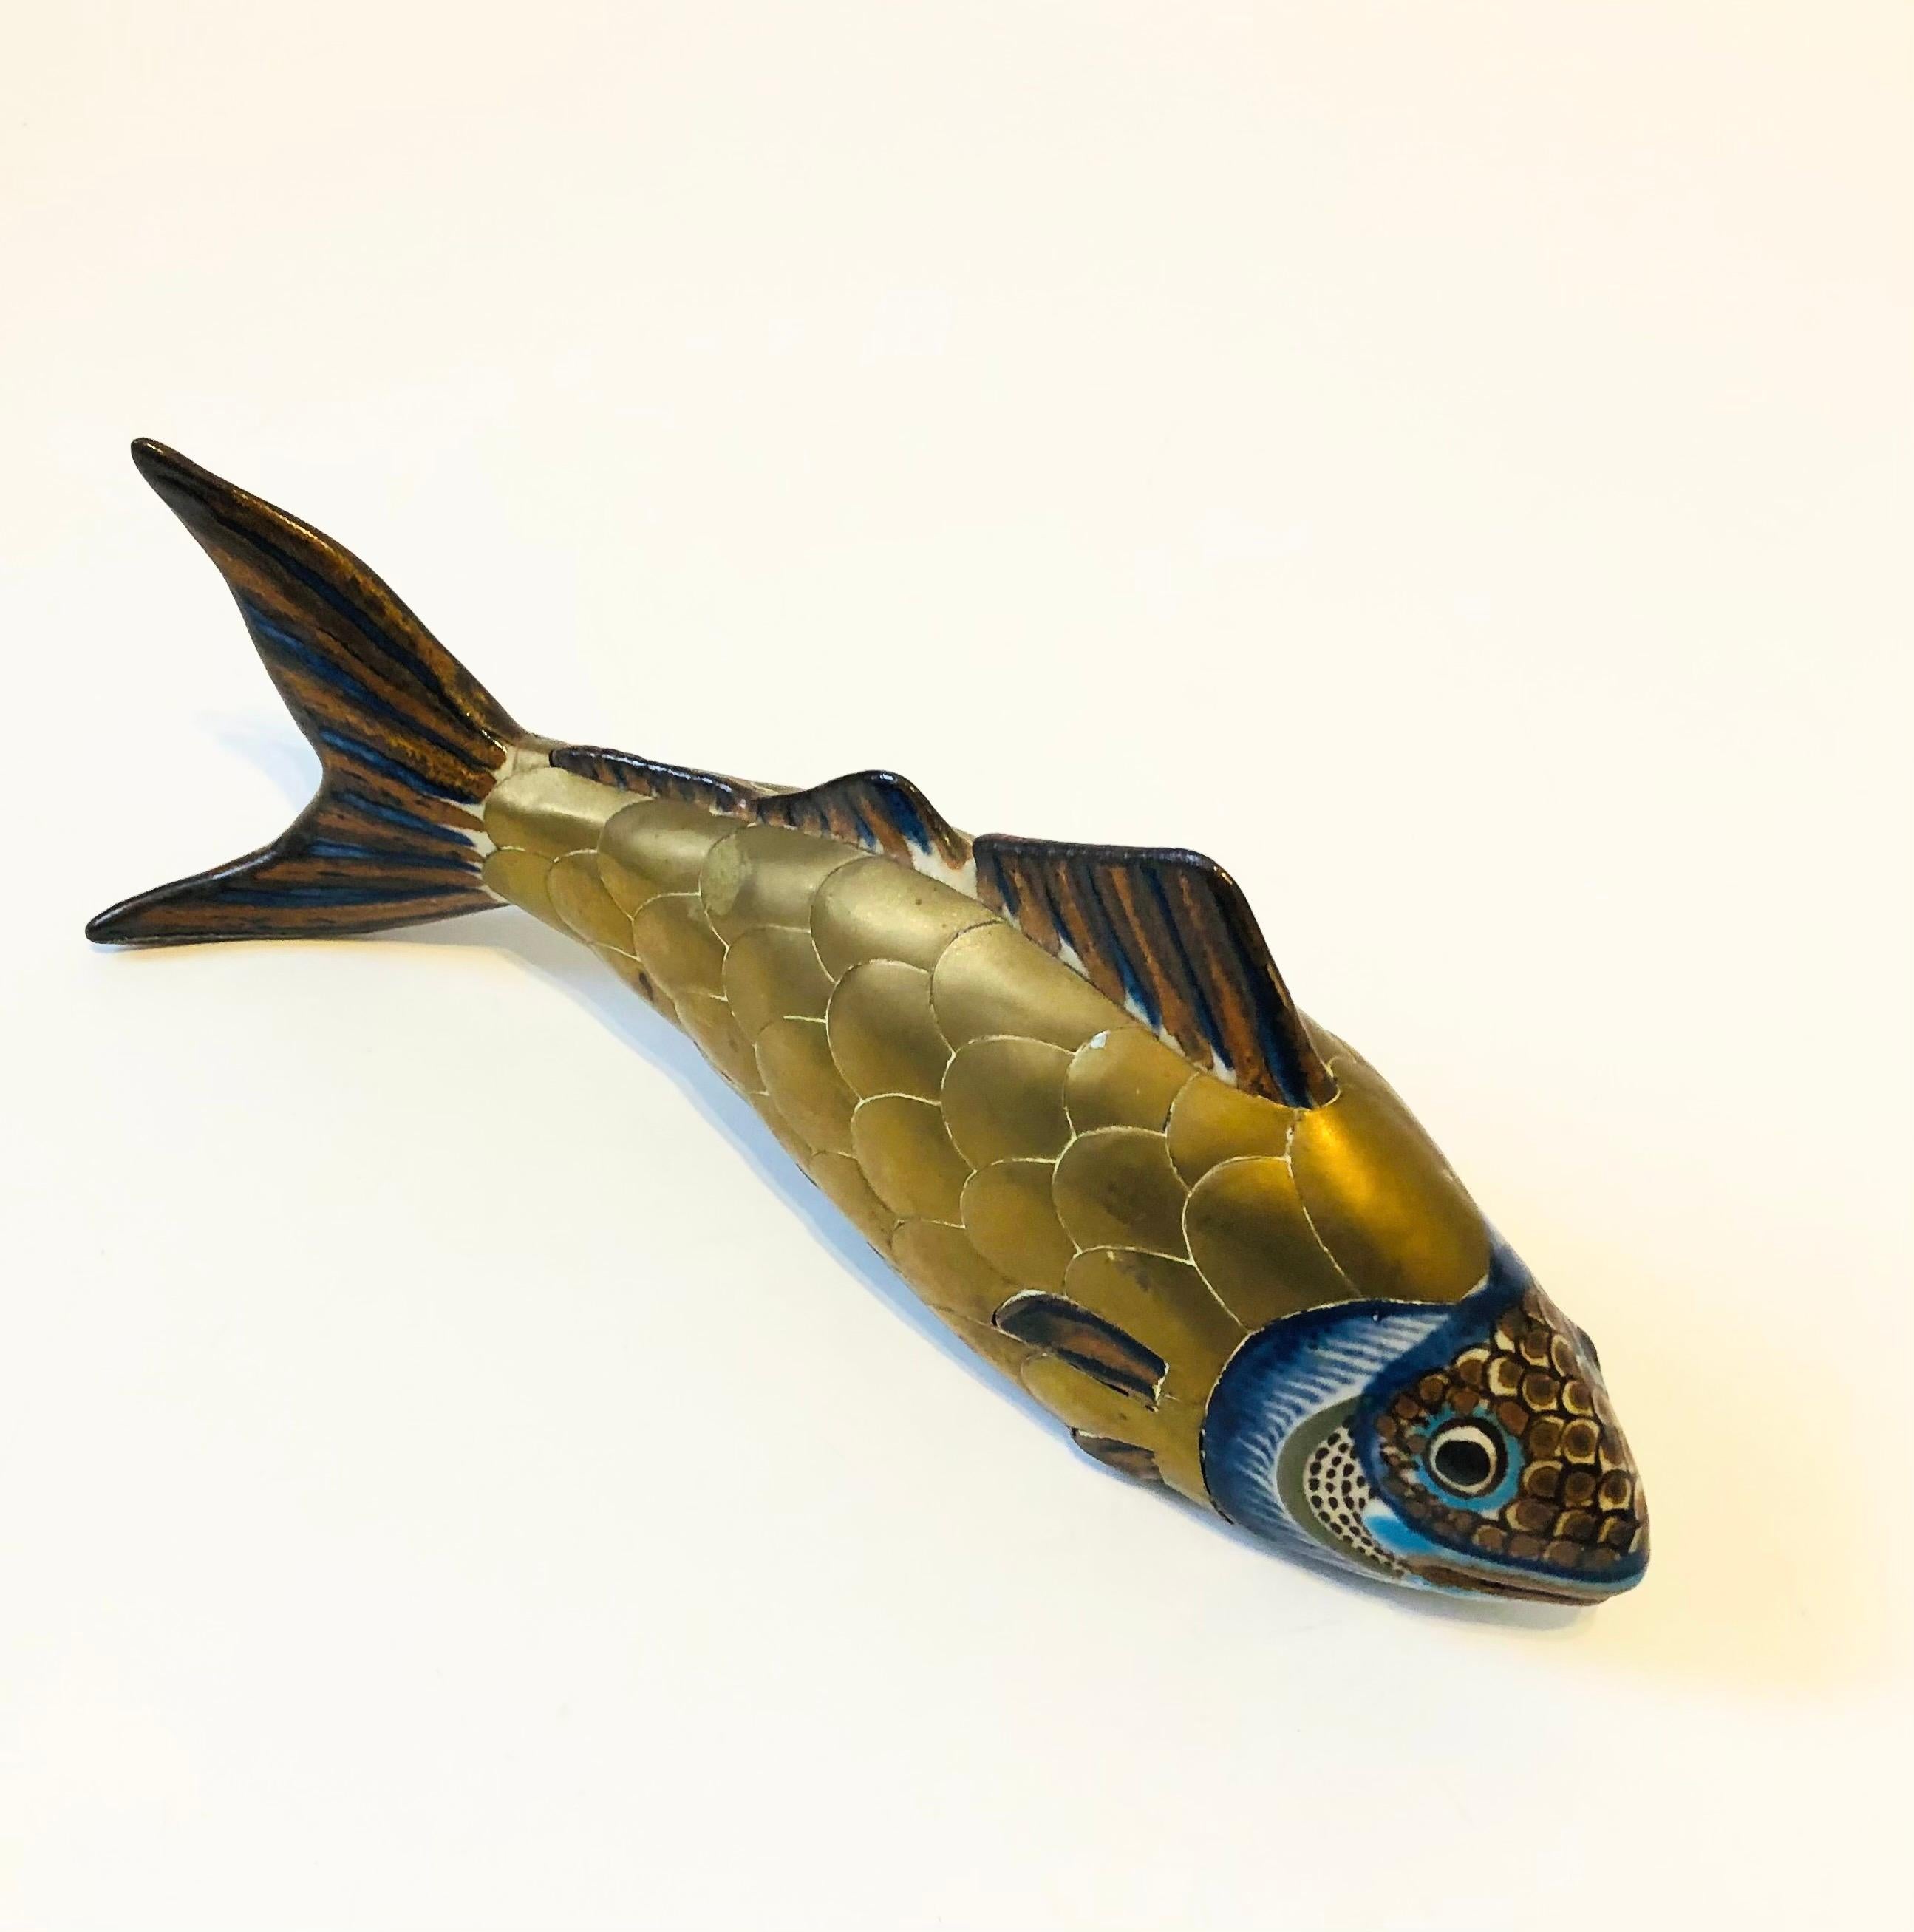 A wonderful vintage tonala pottery fish wrapped in brass. Made in Mexico, with beautiful hand painted designs to the pottery and fish scales formed into the brass.

